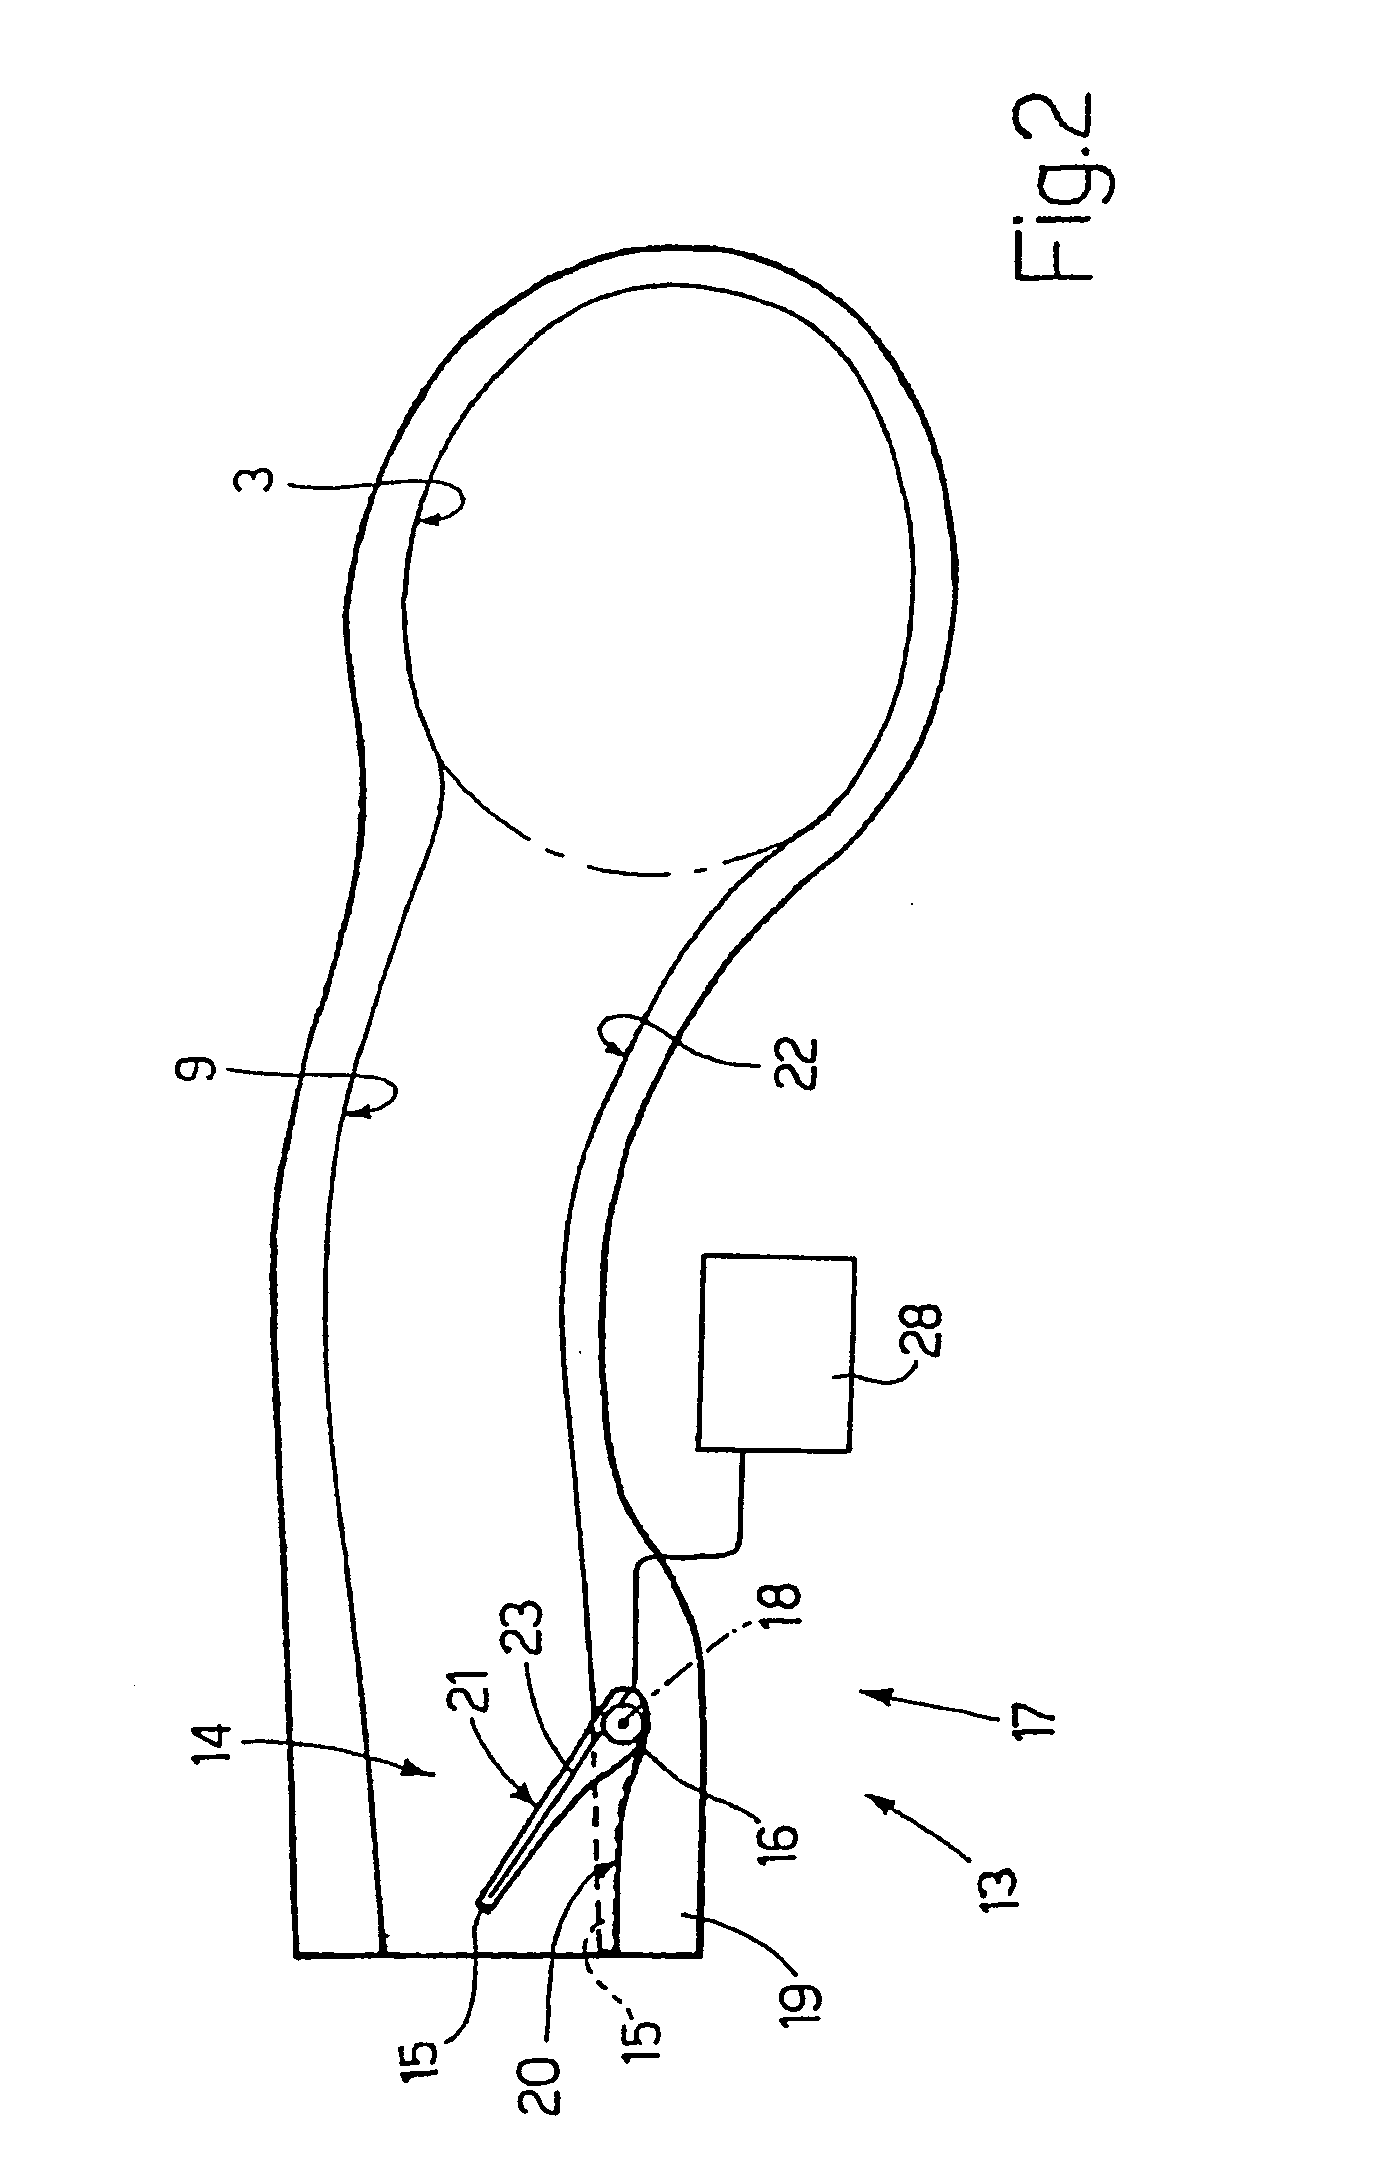 Choke device for an internal combustion engine intake system